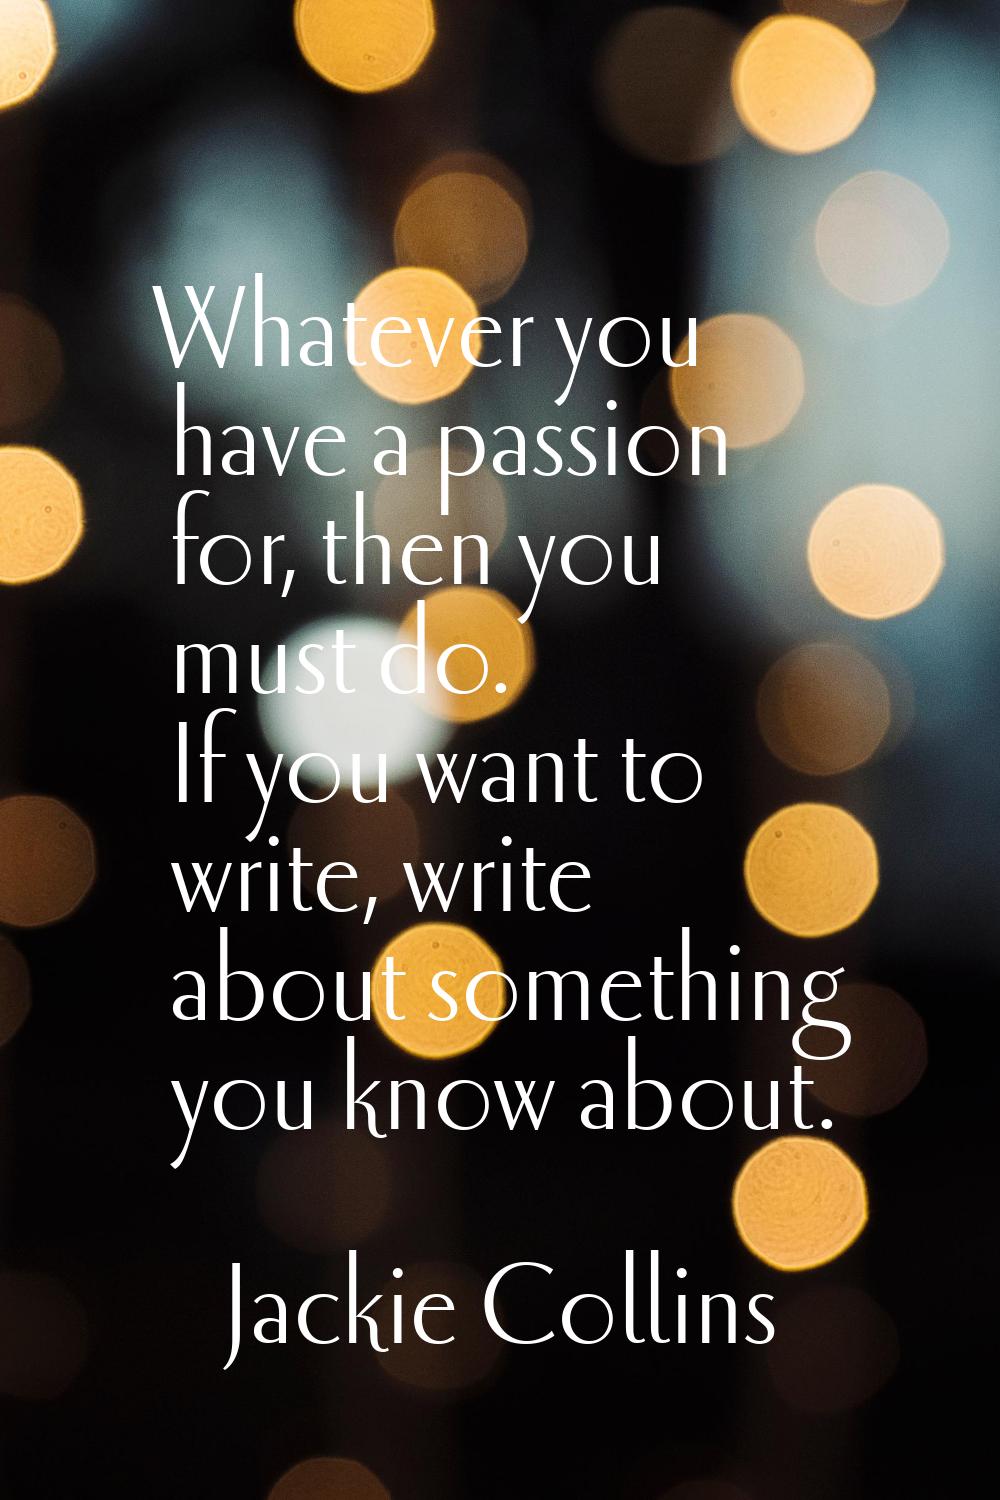 Whatever you have a passion for, then you must do. If you want to write, write about something you 